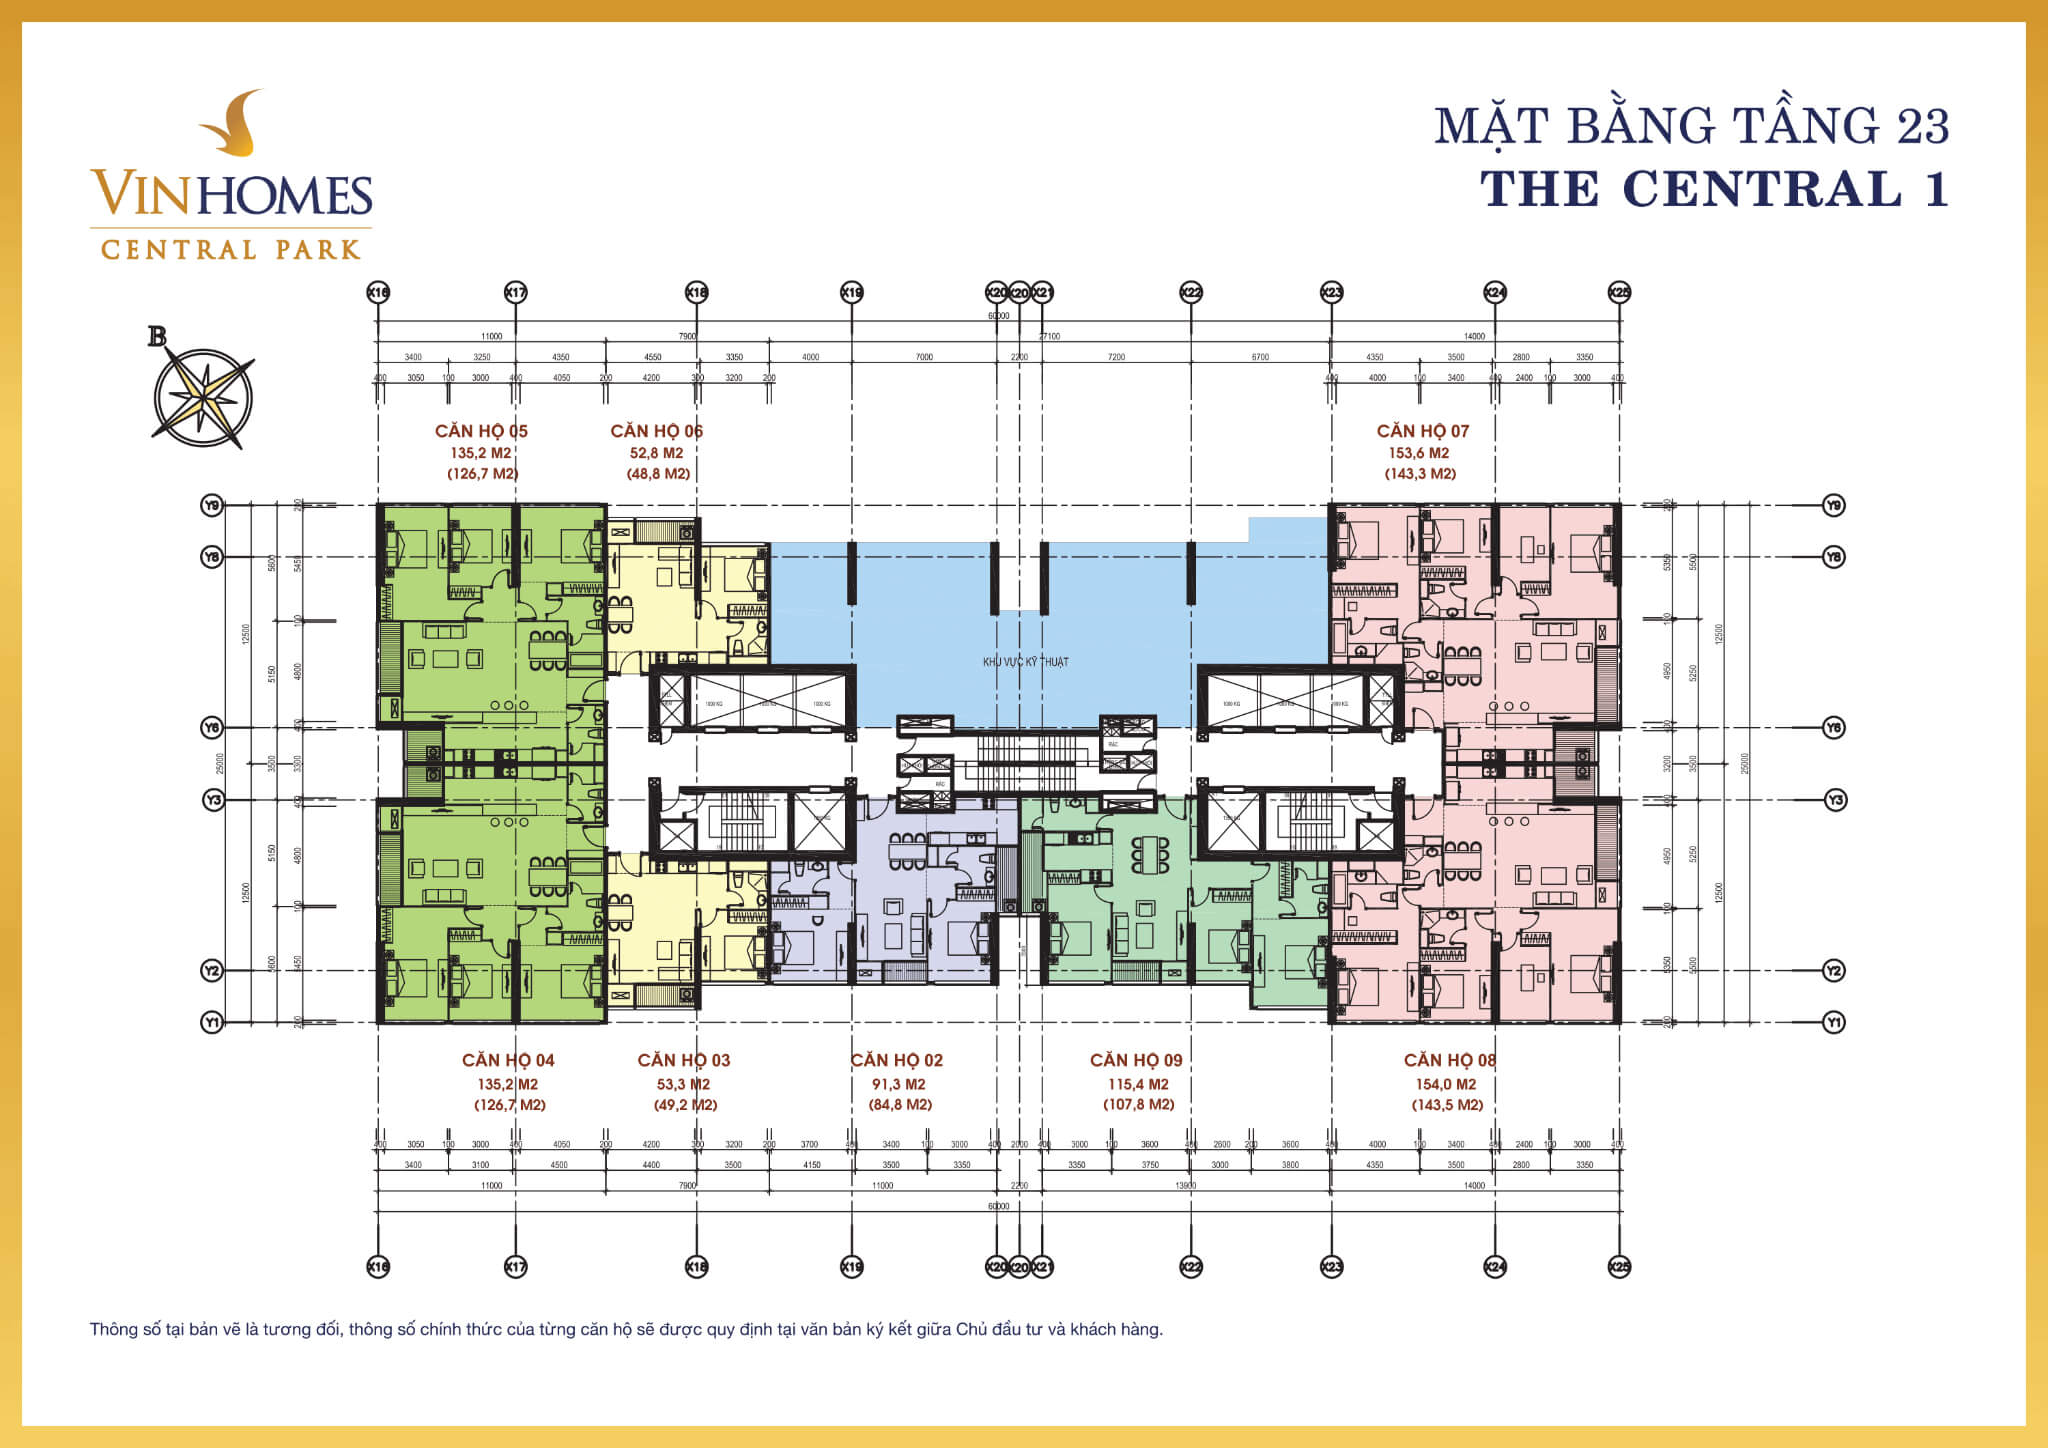 Mặt bằng layout tòa The Central 1 tầng 23 tại Vinhomes Central Park